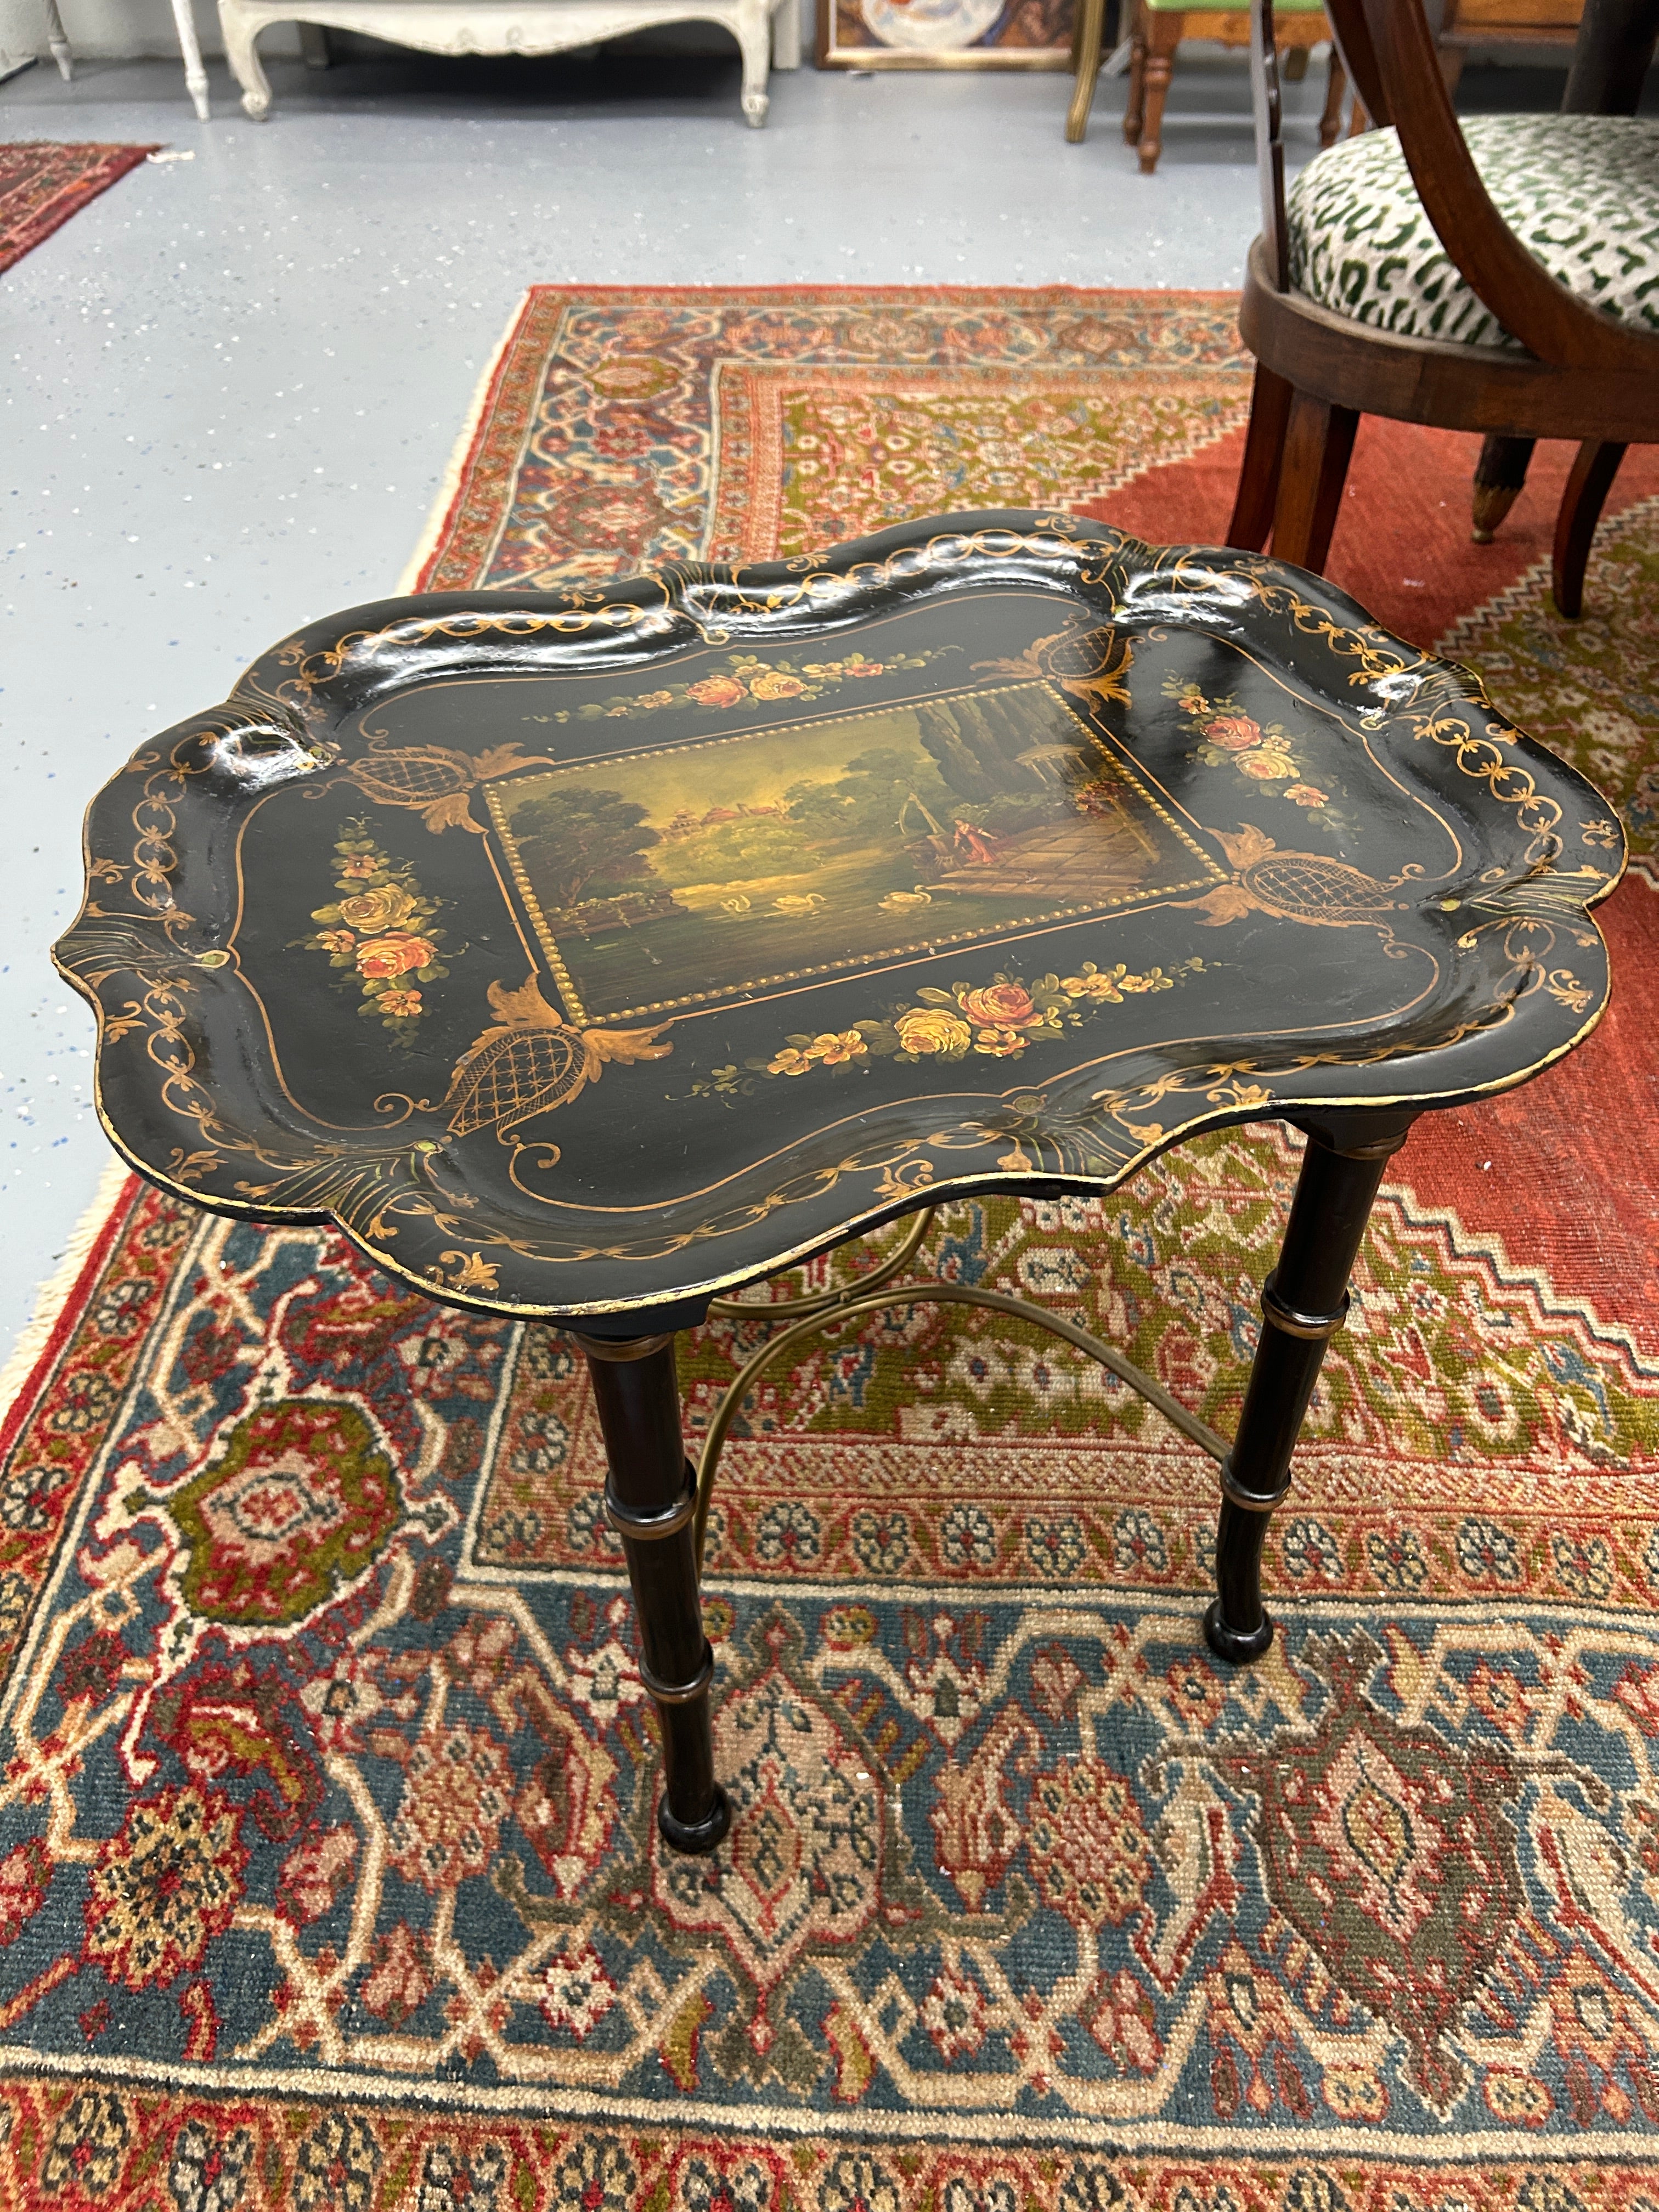 Introducing an exquisite small black lacquer tea table with a touch of timeless elegance. This charming piece, resting gracefully on faux bamboo legs, invites you to step into a world of sophistication and artistic beauty.

Crafted in the early 20th